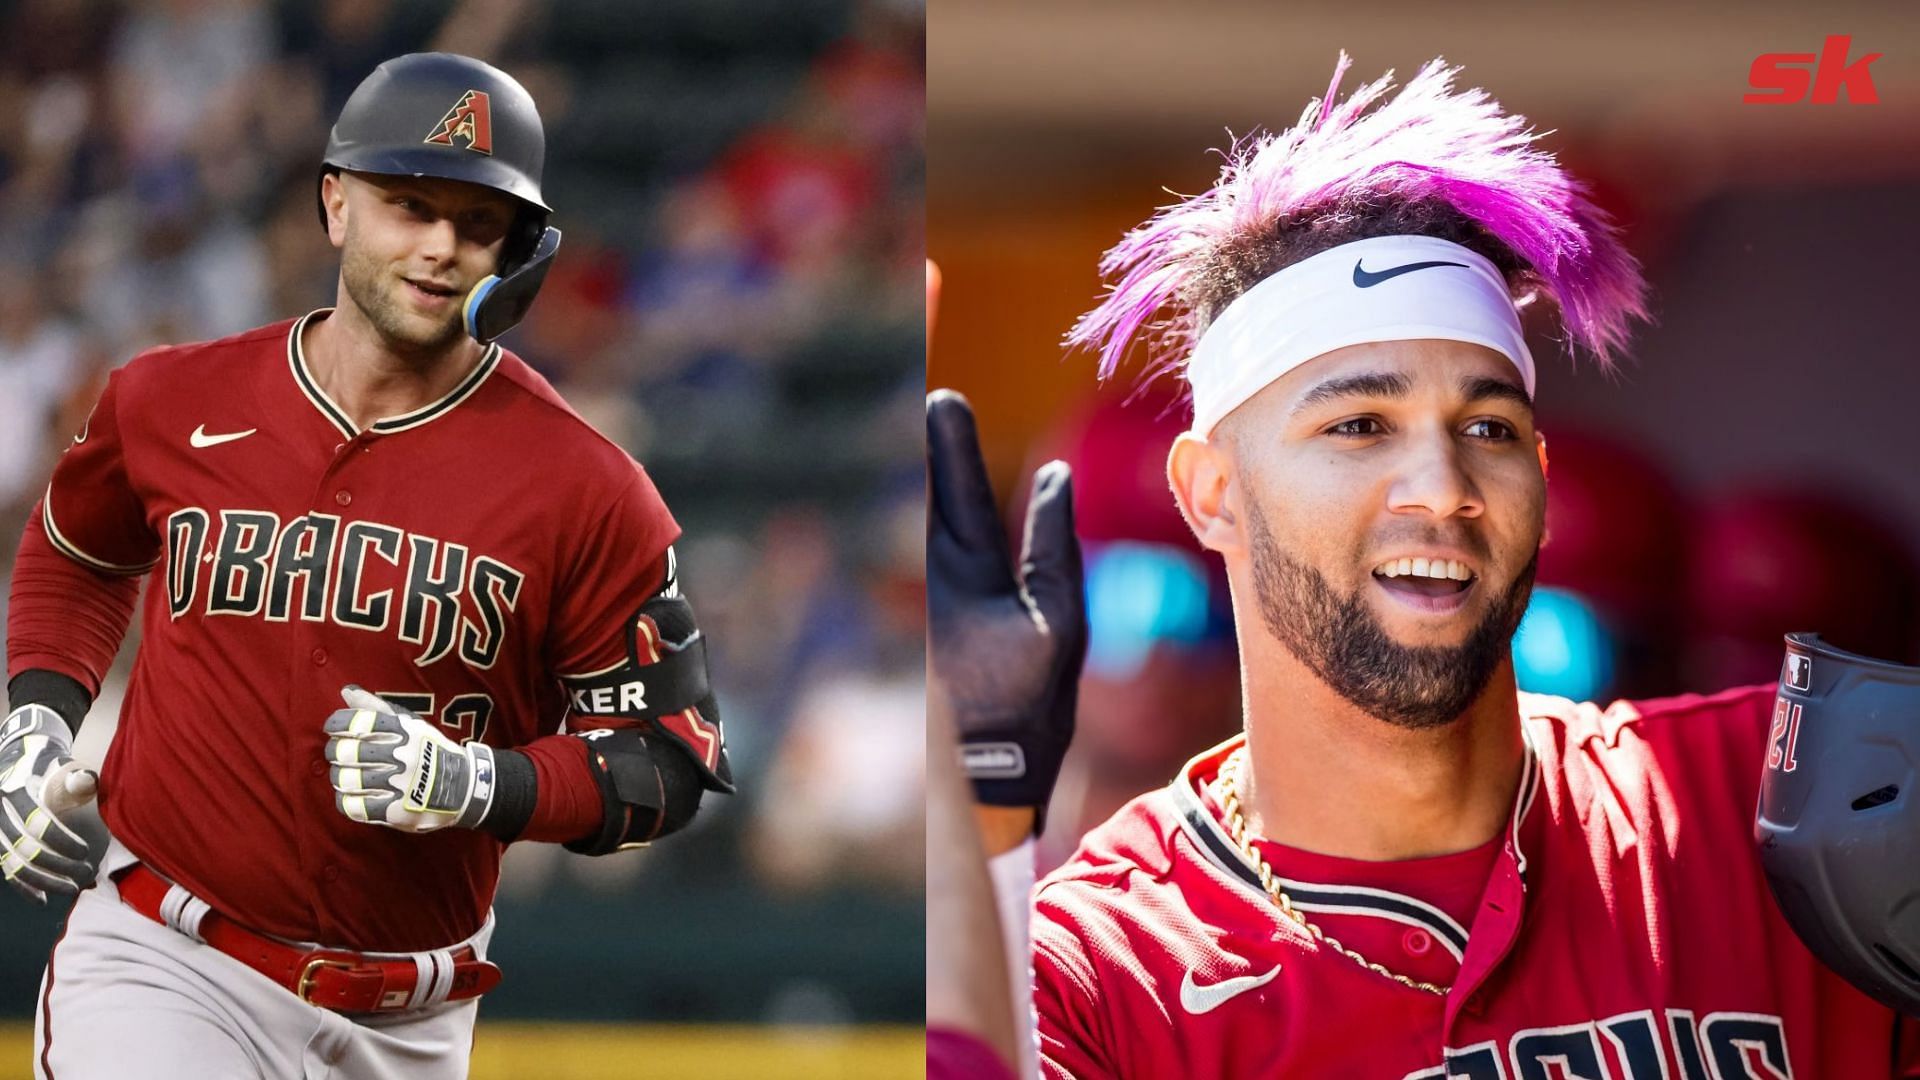 Christian Walker congratulates D'Backs teammate on becoming a US citizen  with warm gesture